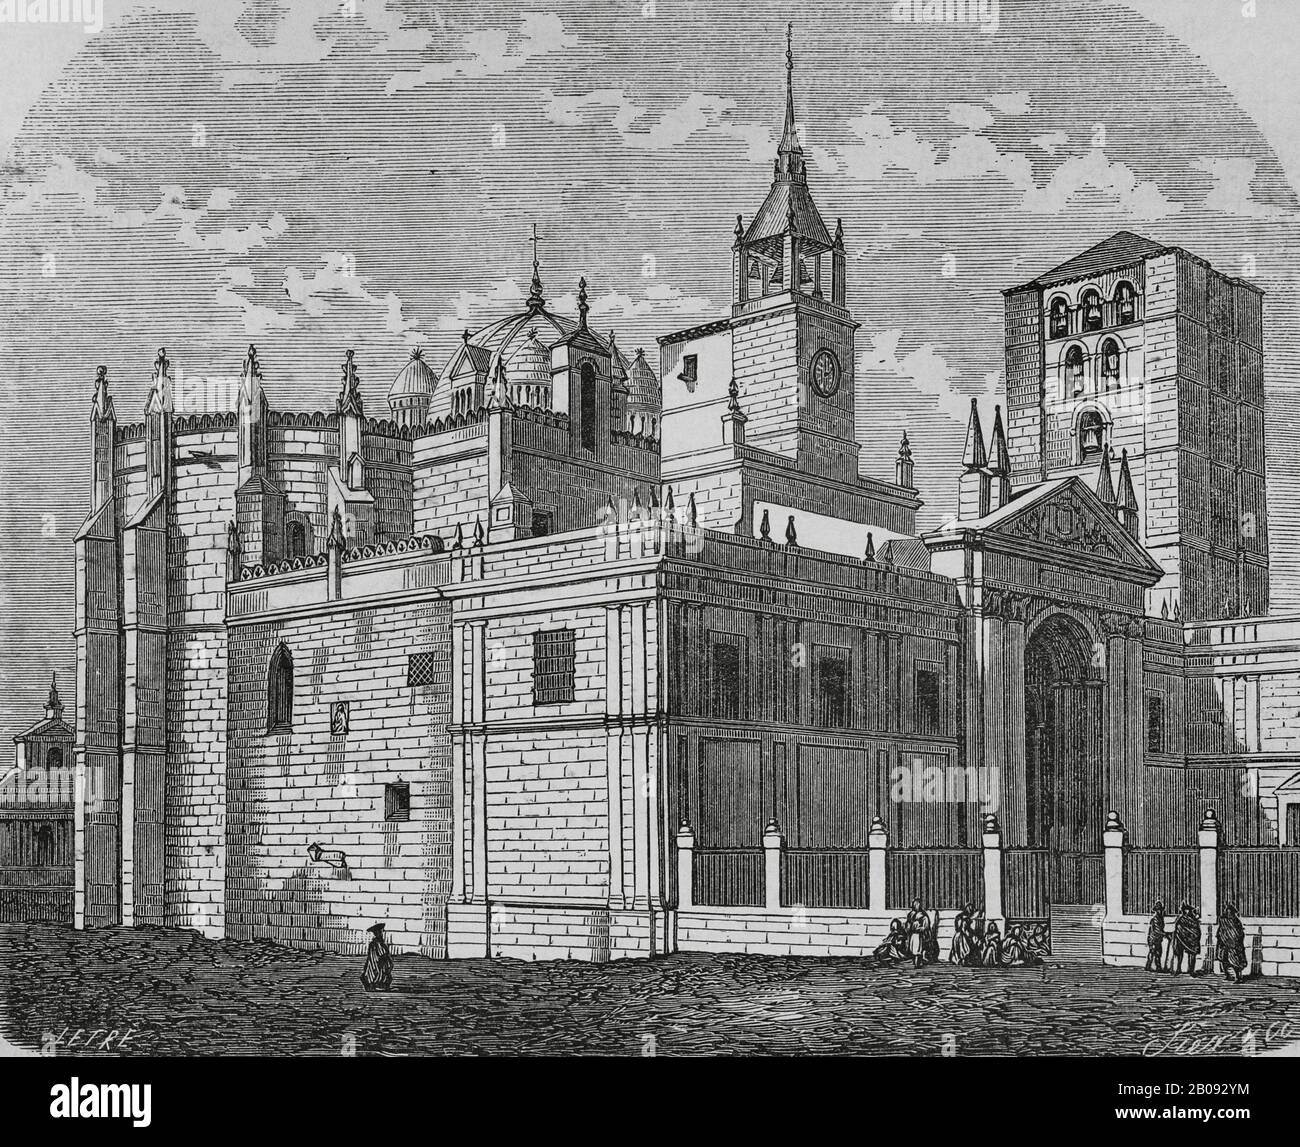 Spain, Zamora. Cathedral. It was founded by King Alfonso VII and consecrated in 1175. Illustration by Letre. Engraving by Sierra, 19th century. Cronica General de España, Historia Ilustrada y Descriptiva de sus Provincias. Asturias and Leon, 1867. Stock Photo